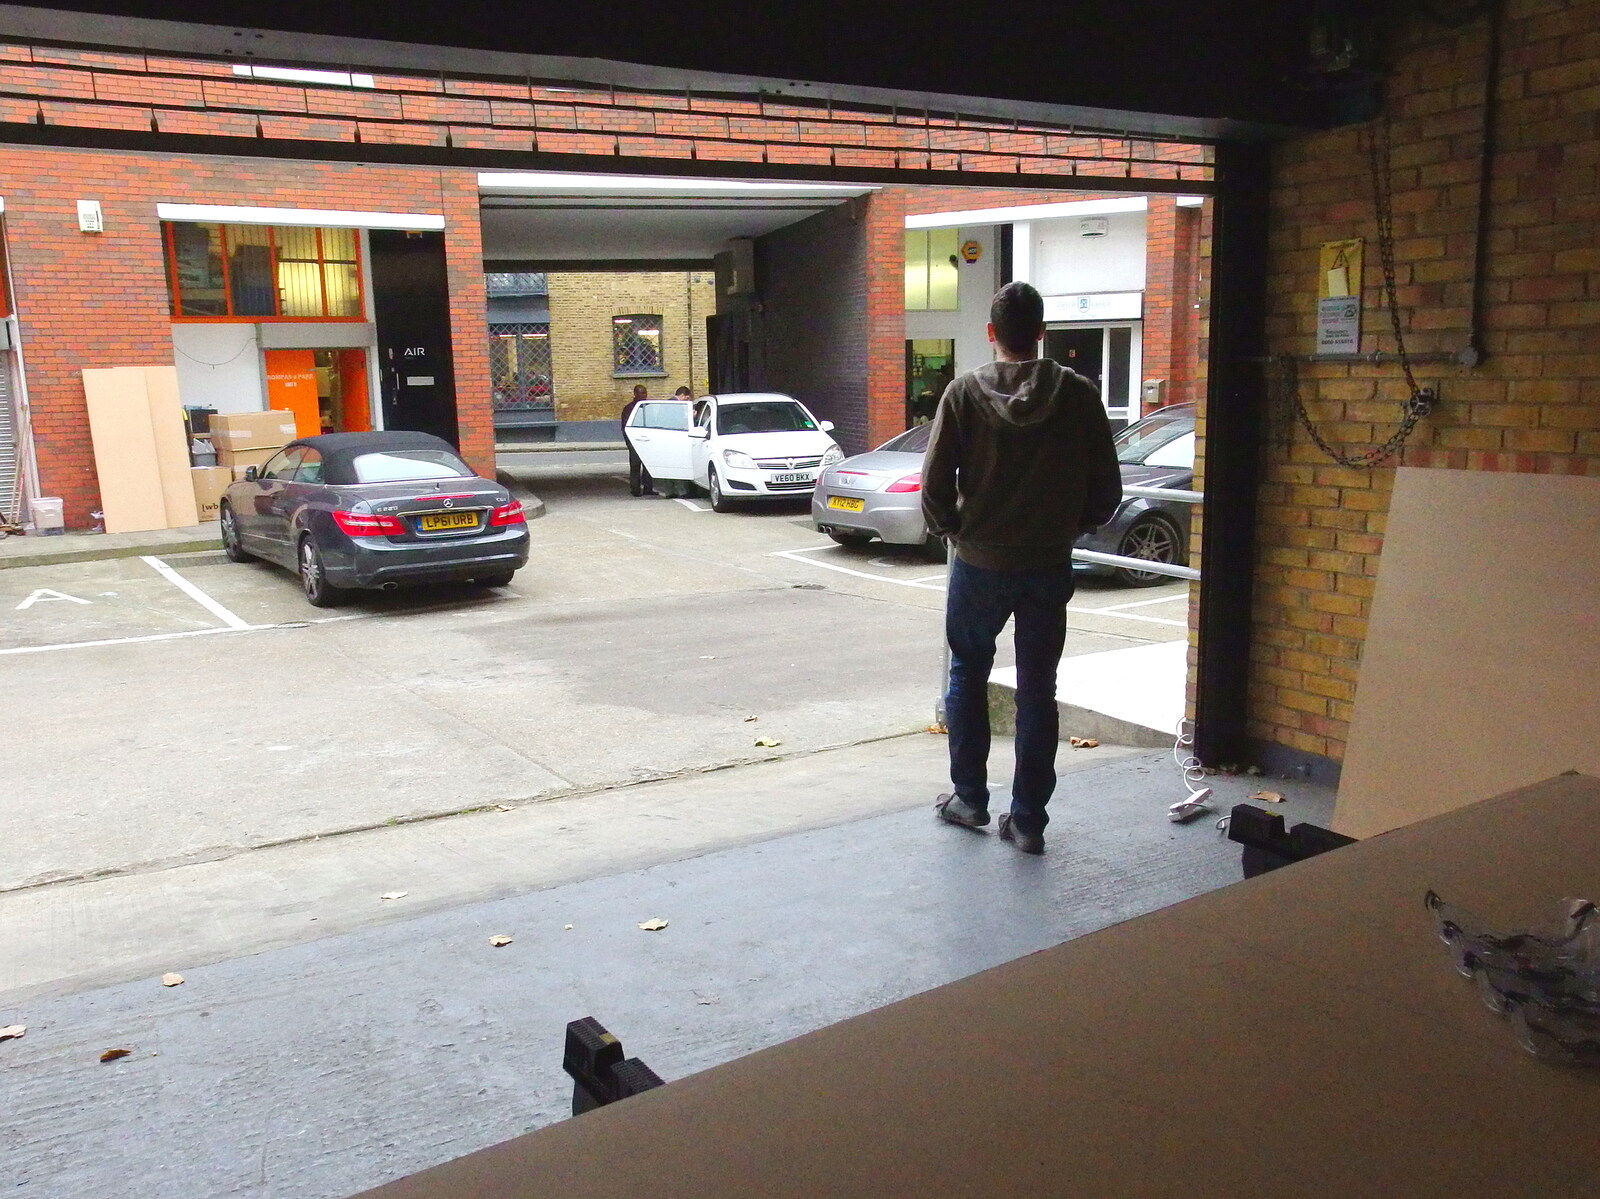 Emlyn wanders off into the yard from SwiftKey's Arcade Cabinet, and the Streets of Southwark, London - 5th December 2013